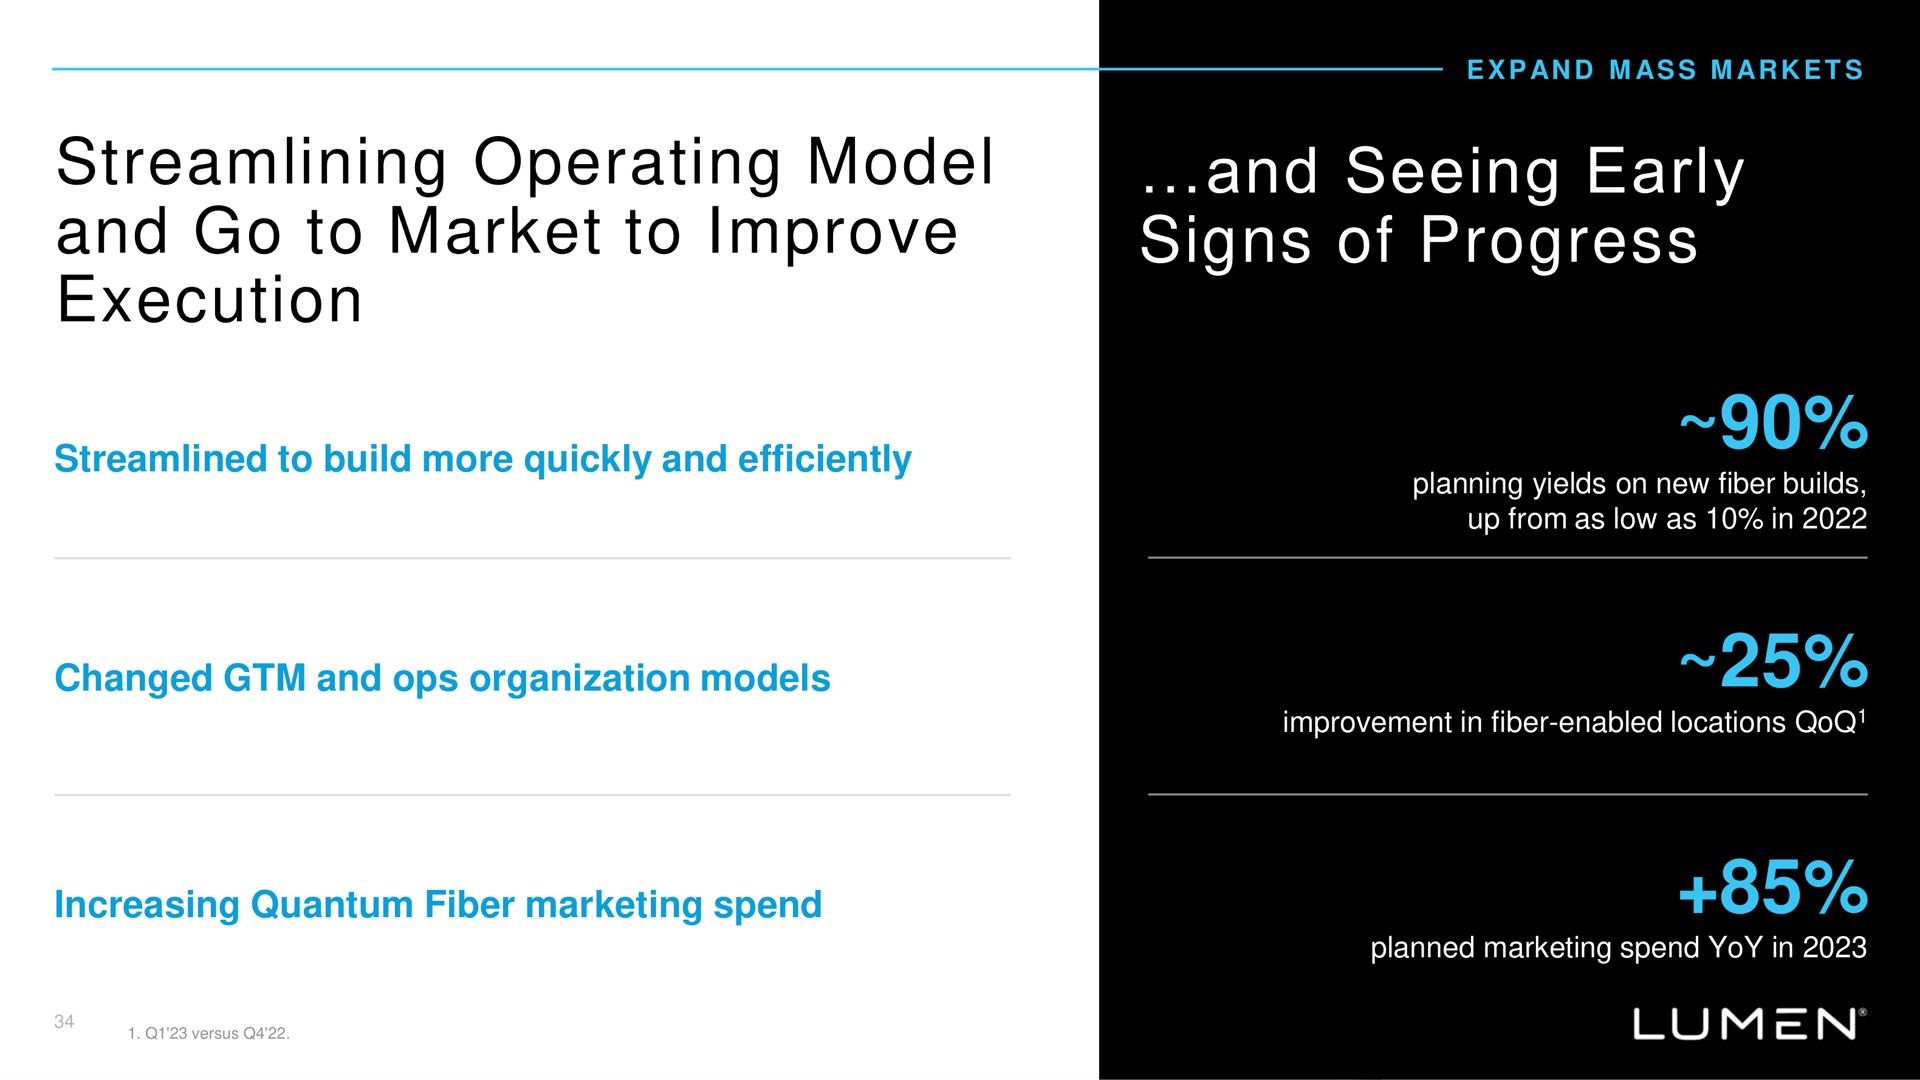 streamlining operating model and go to market to improve execution and seeing early signs of progress | Lumen